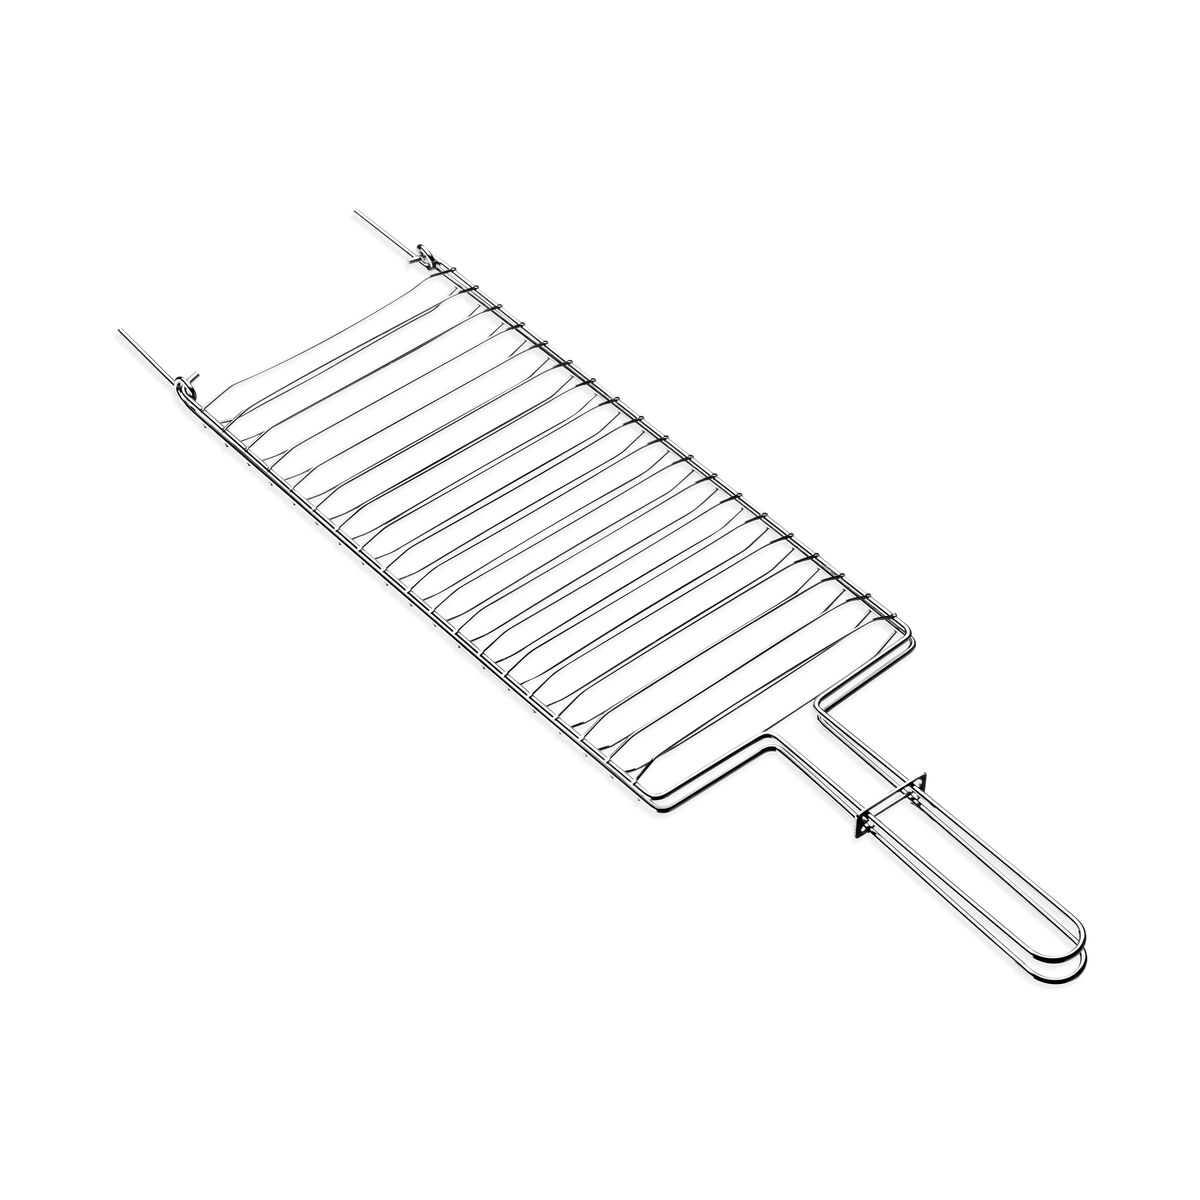 Tramontina Churrasco Stainless-Steel Grill, 42x23 cm